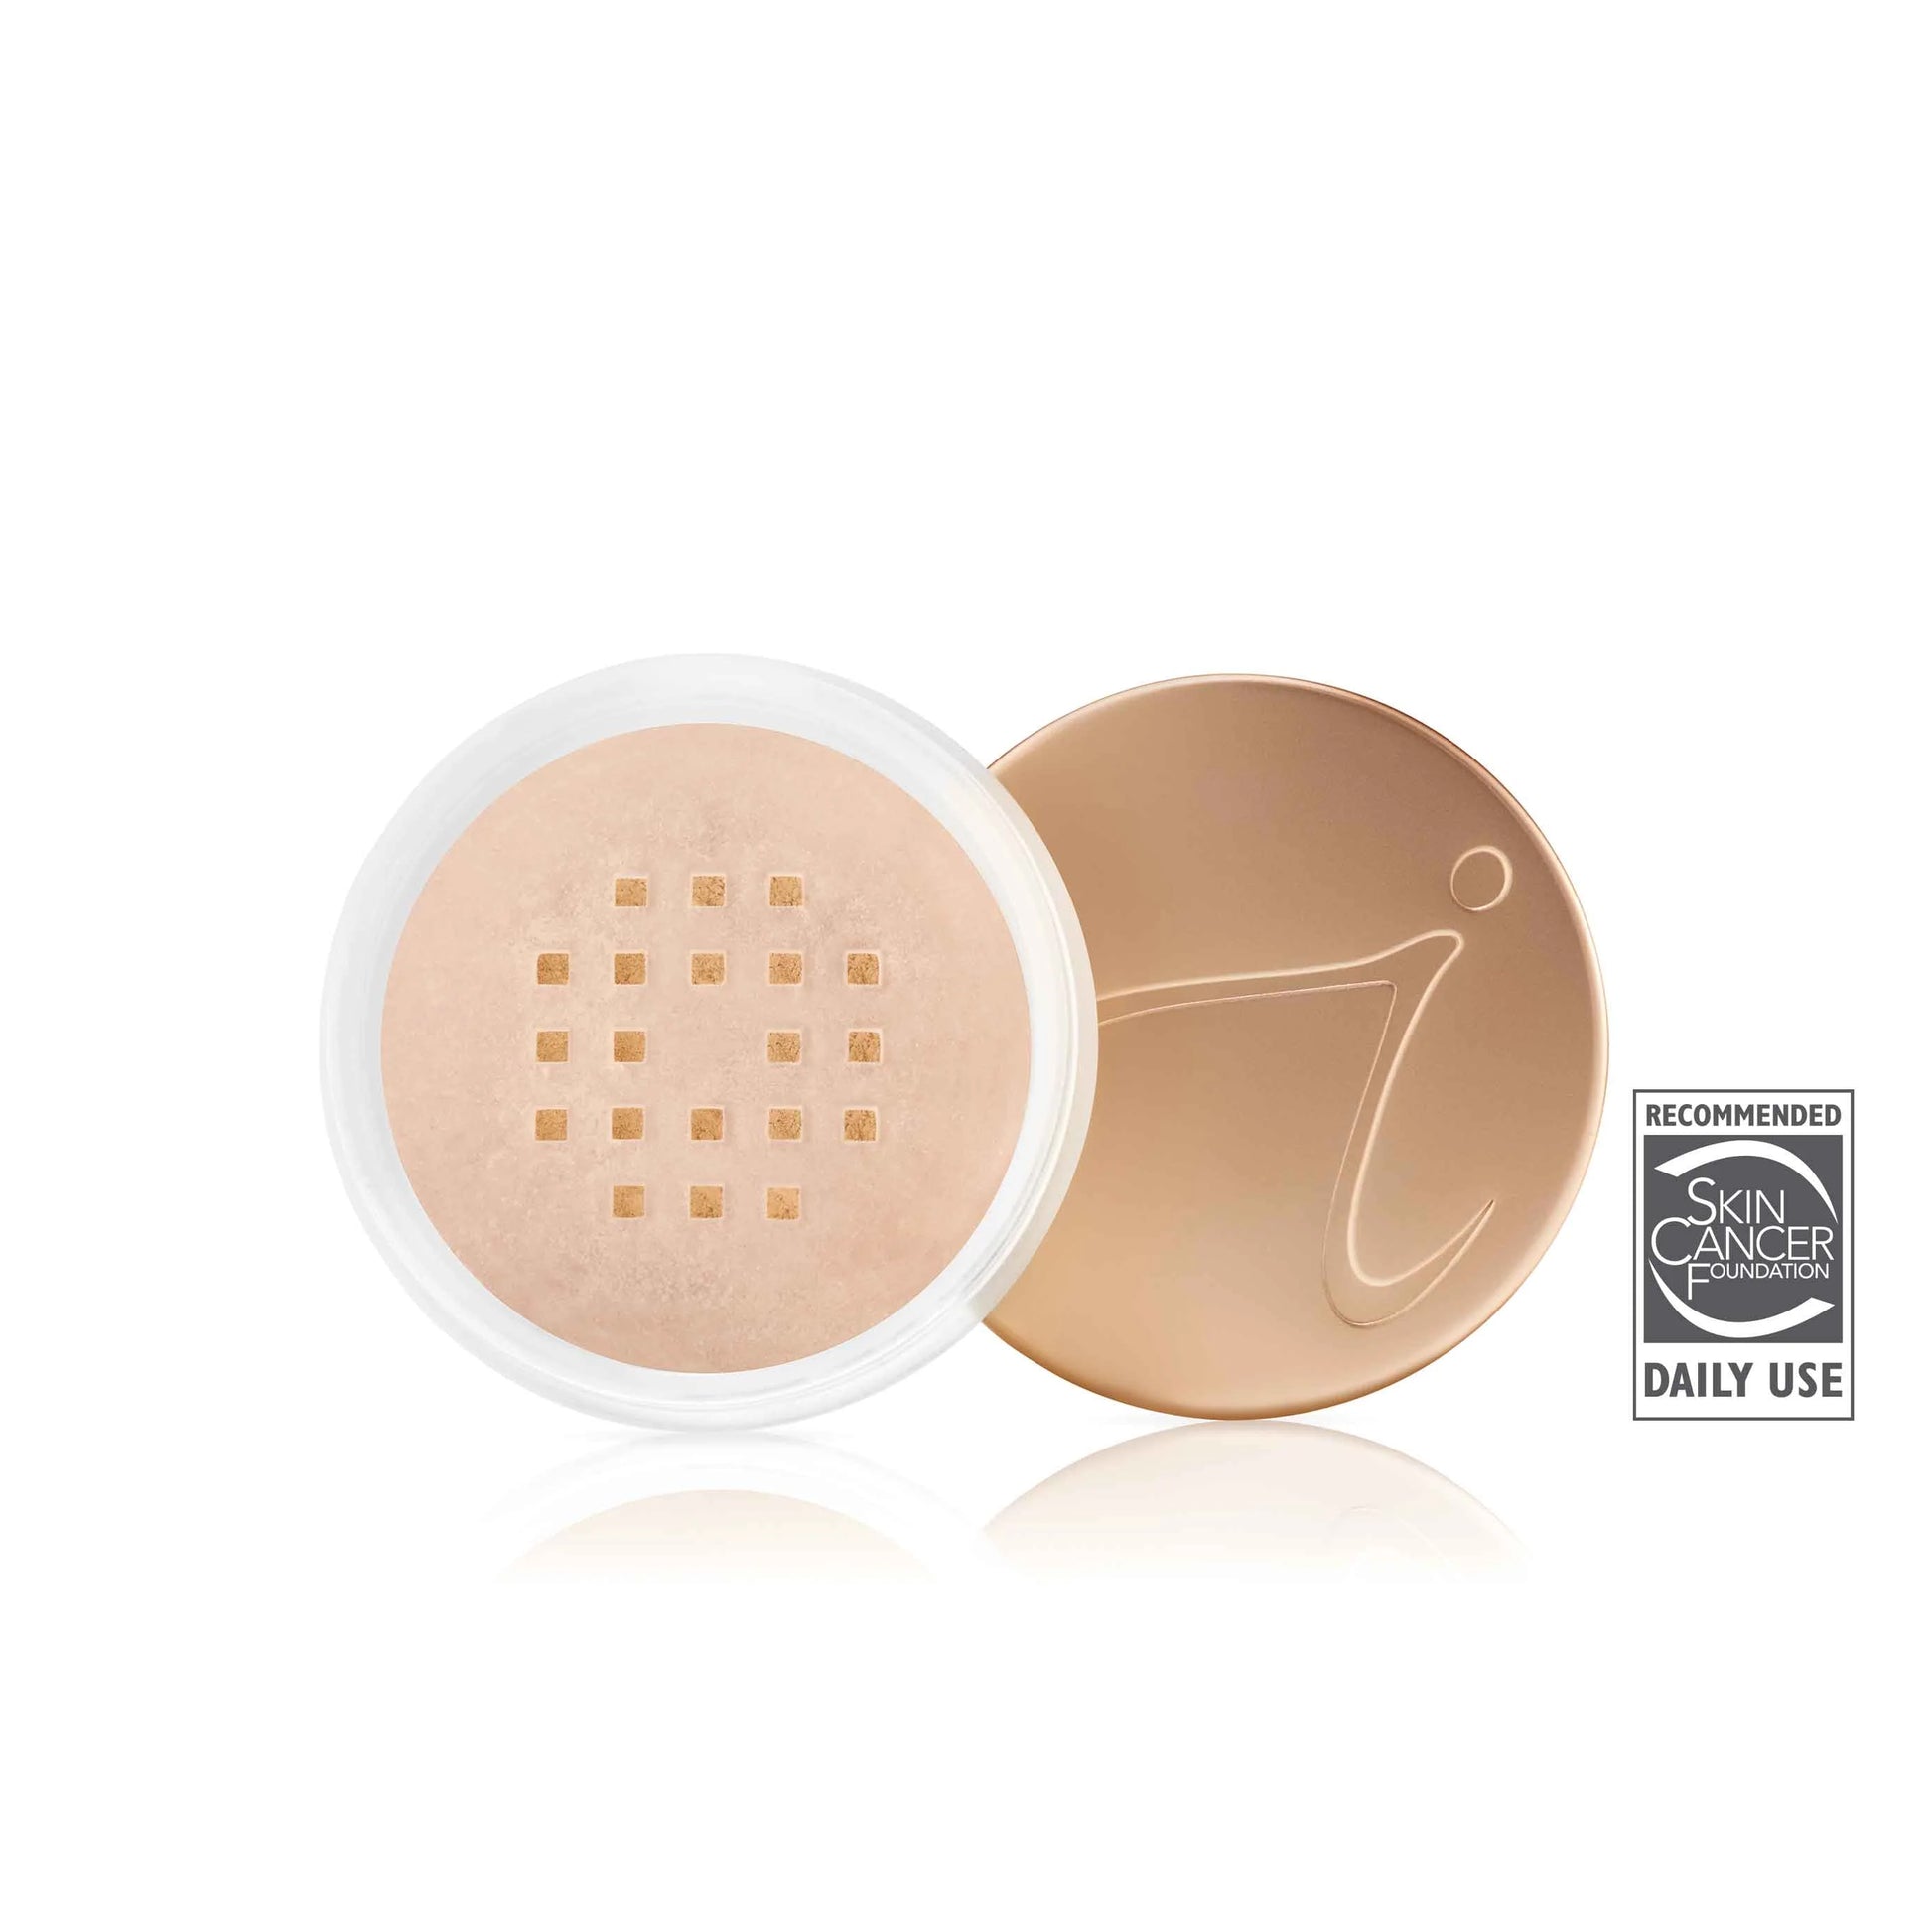 Jane Iredale Amazing Base Loose Mineral Powder Foundation, Natural Ingredients with skincare benefits, image of product. 